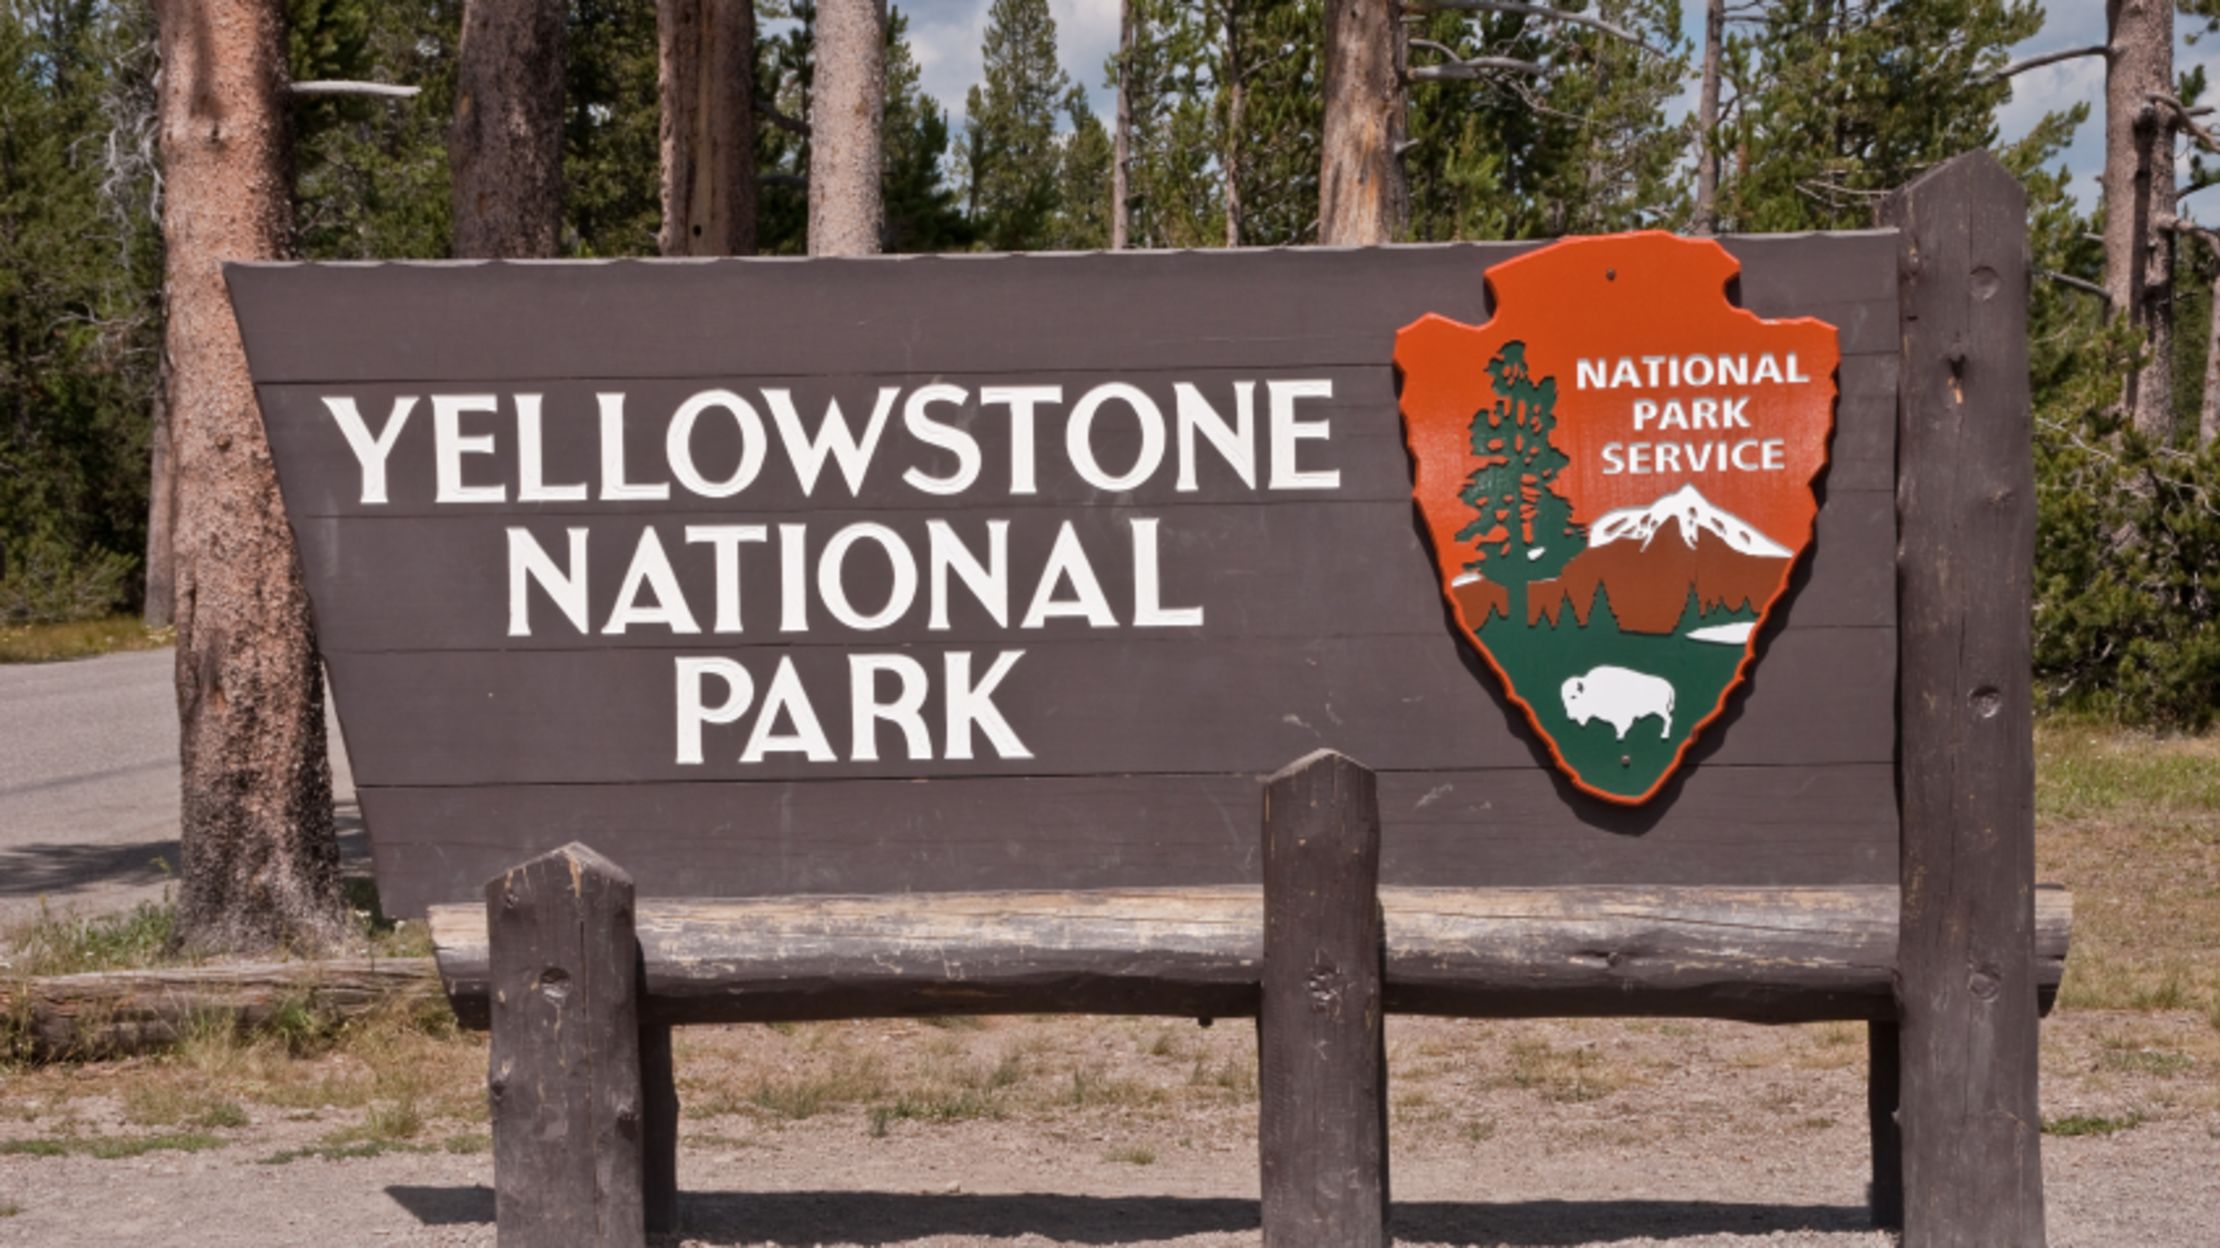 15 Things You Might Not Know About Yellowstone National Park